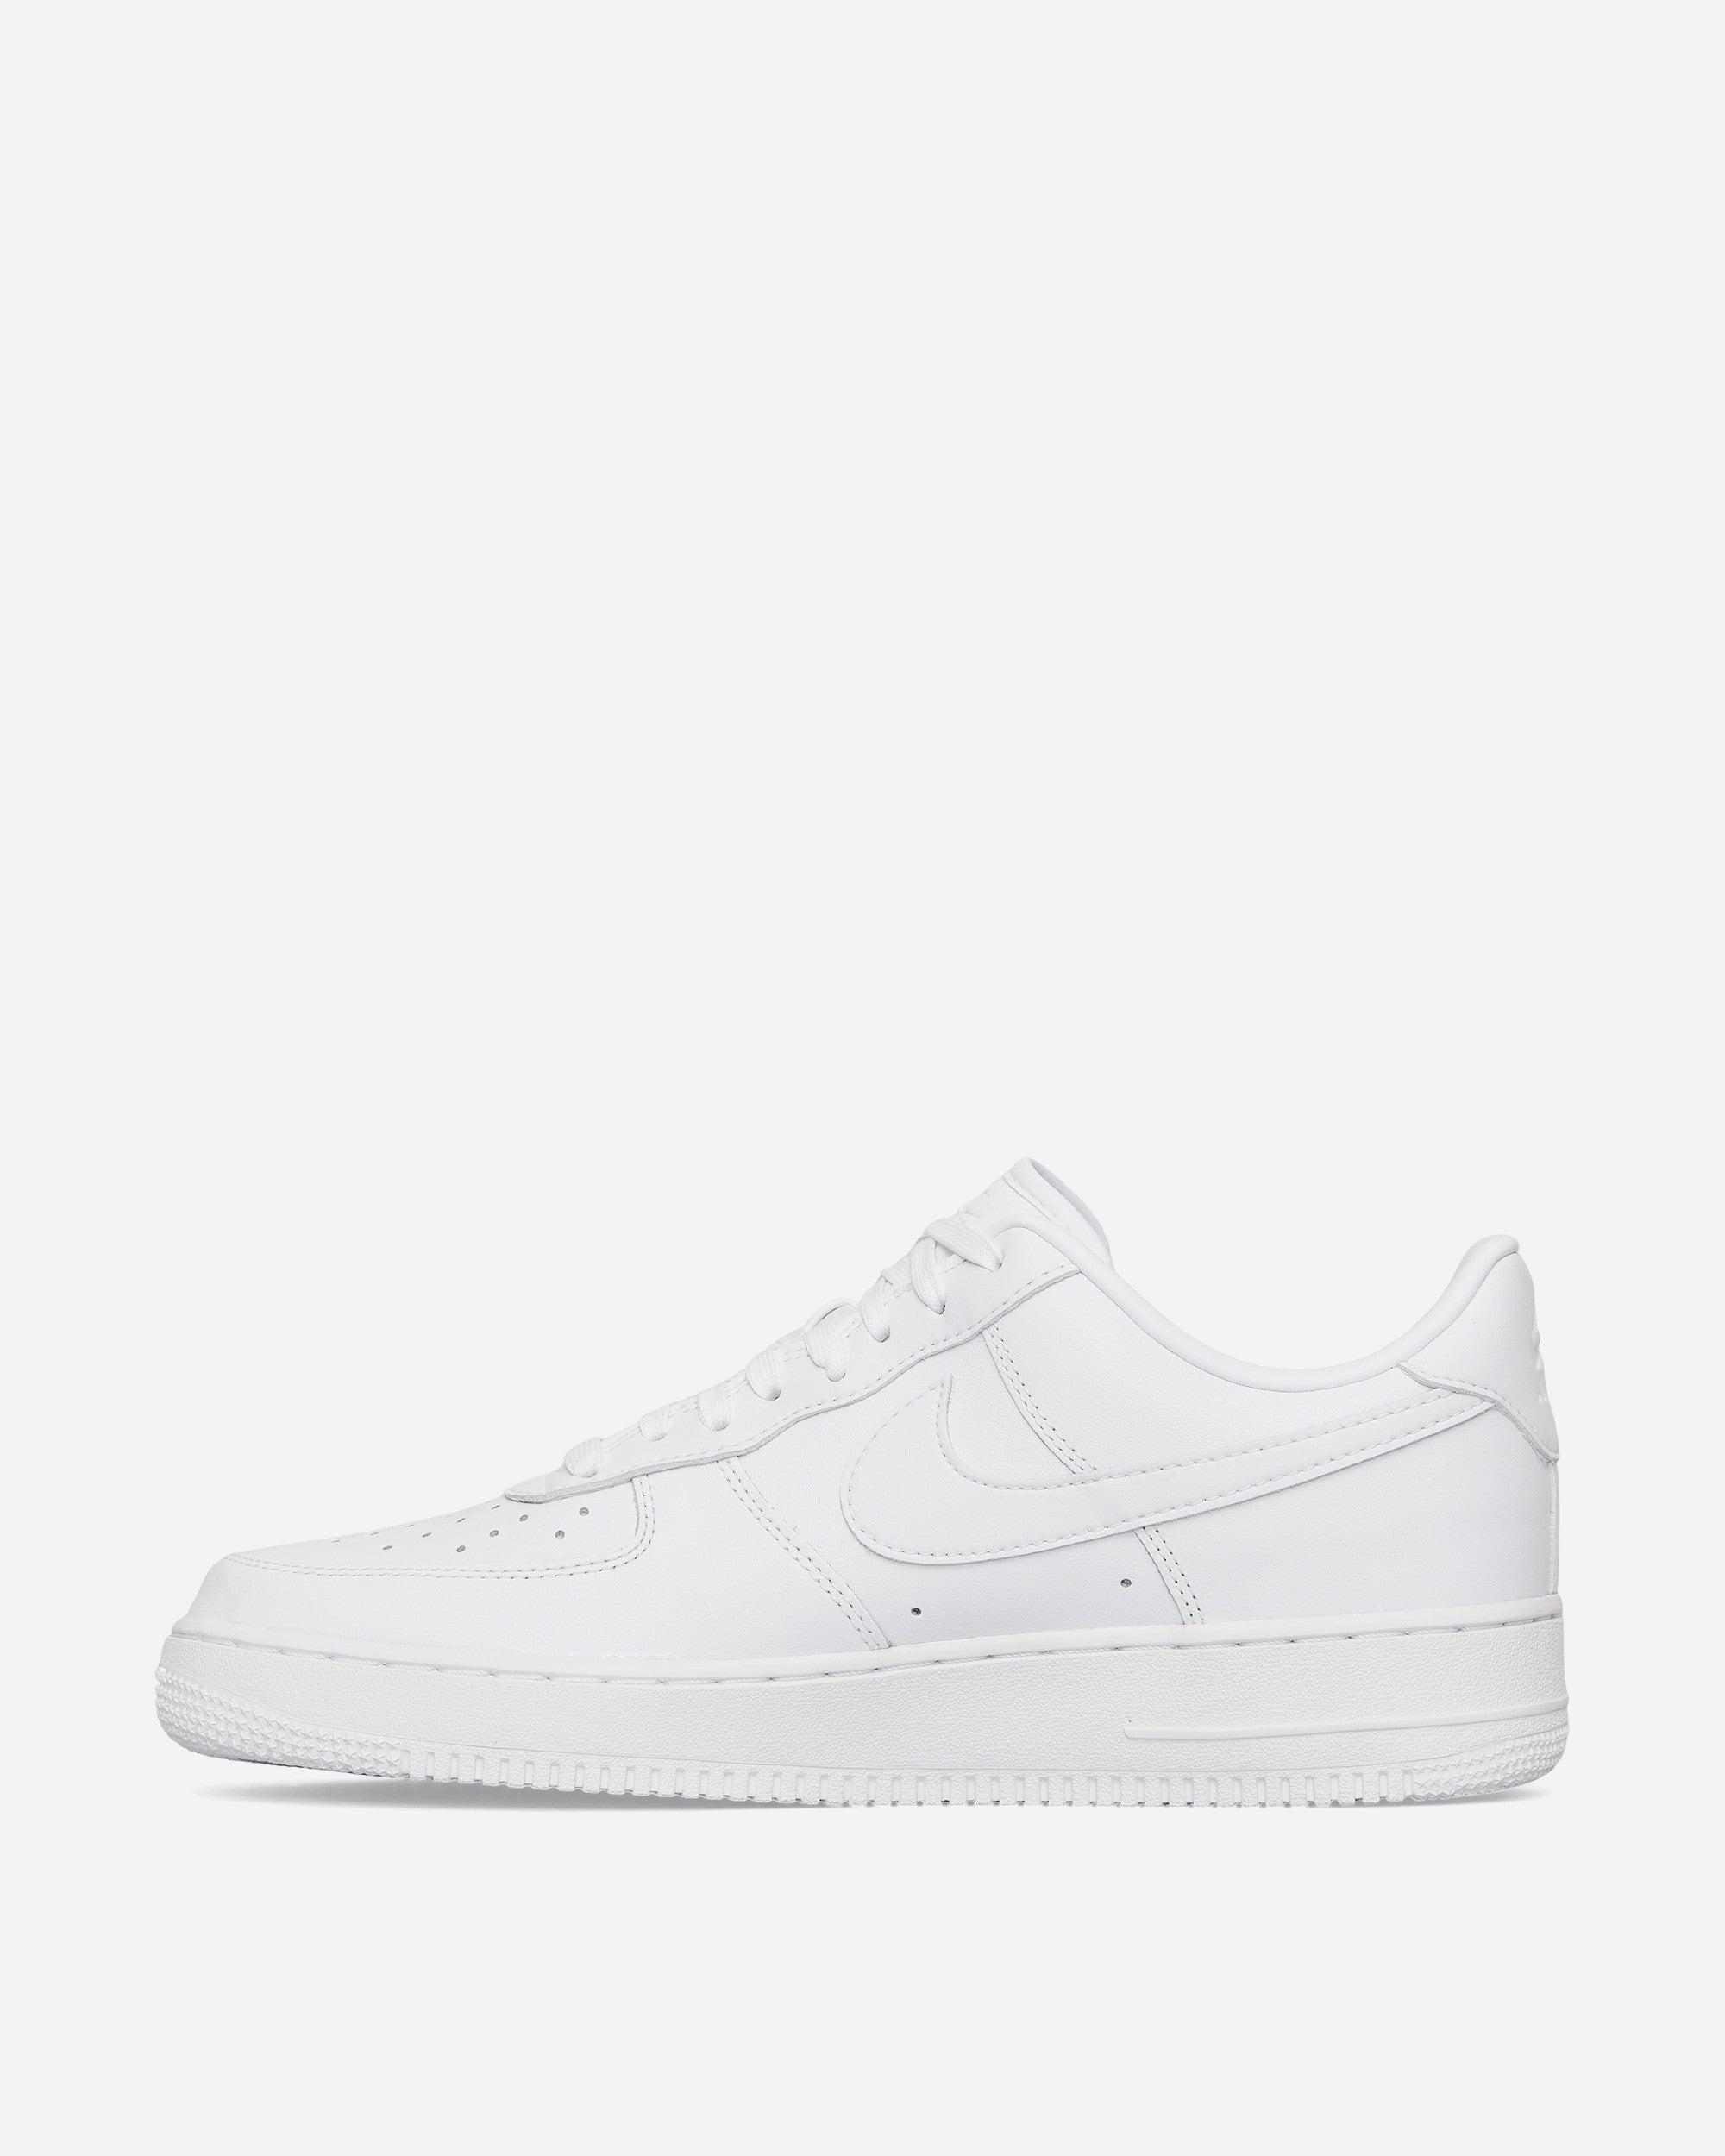 Nike Leather Air Force 1 Low Retro Shoes in White/White-White-Metallic Gold  (White) for Men - Save 40% | Lyst